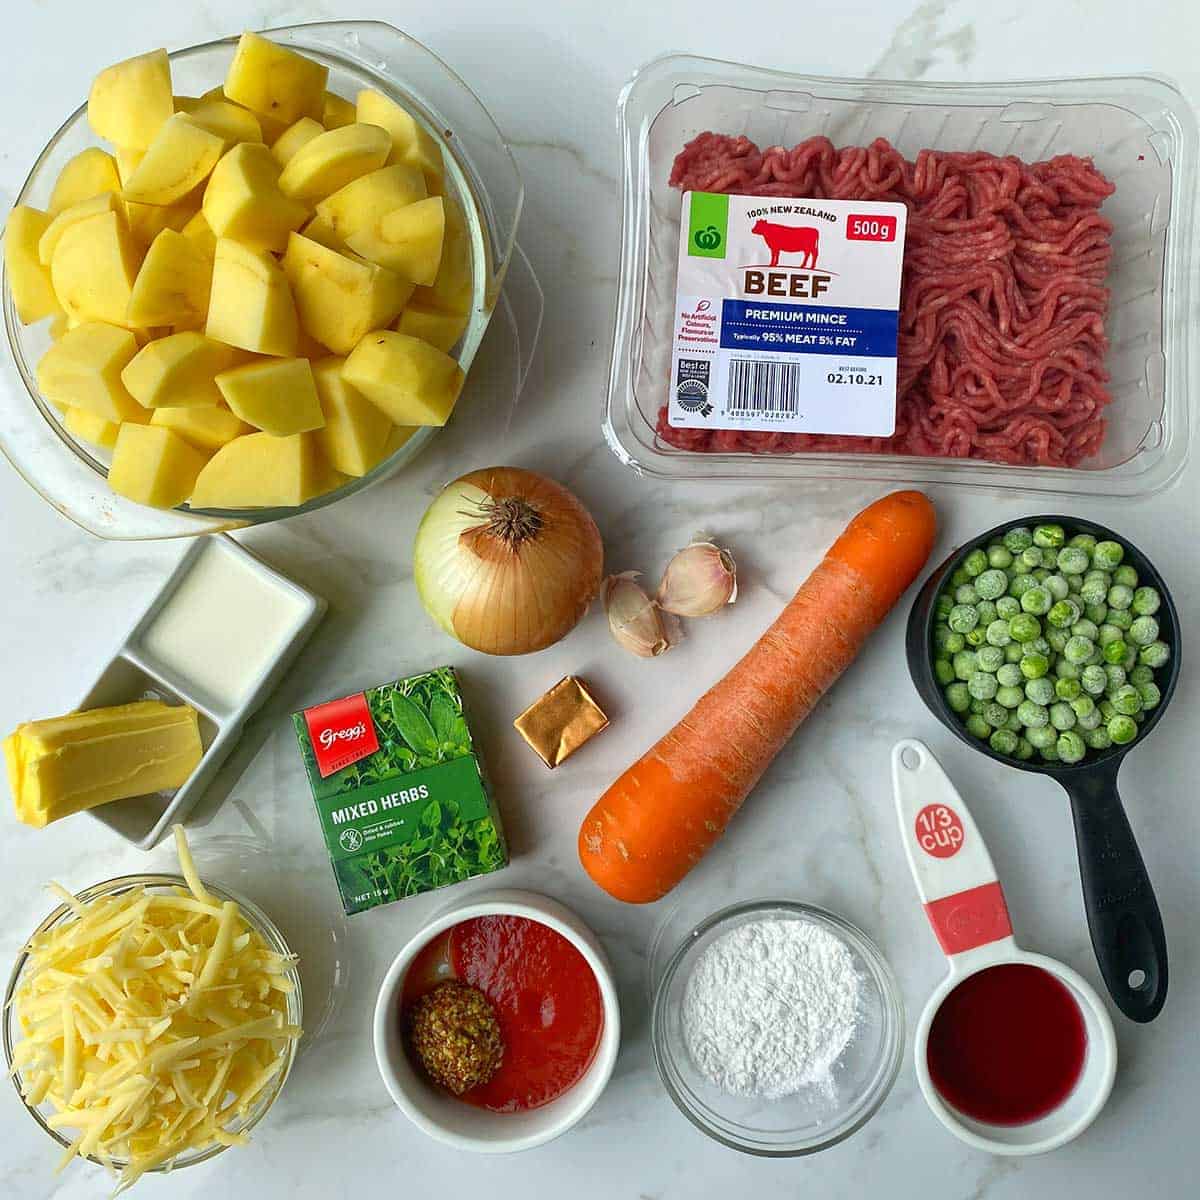 The ingredients for Beef Cottage Pies sitting on a white bench.